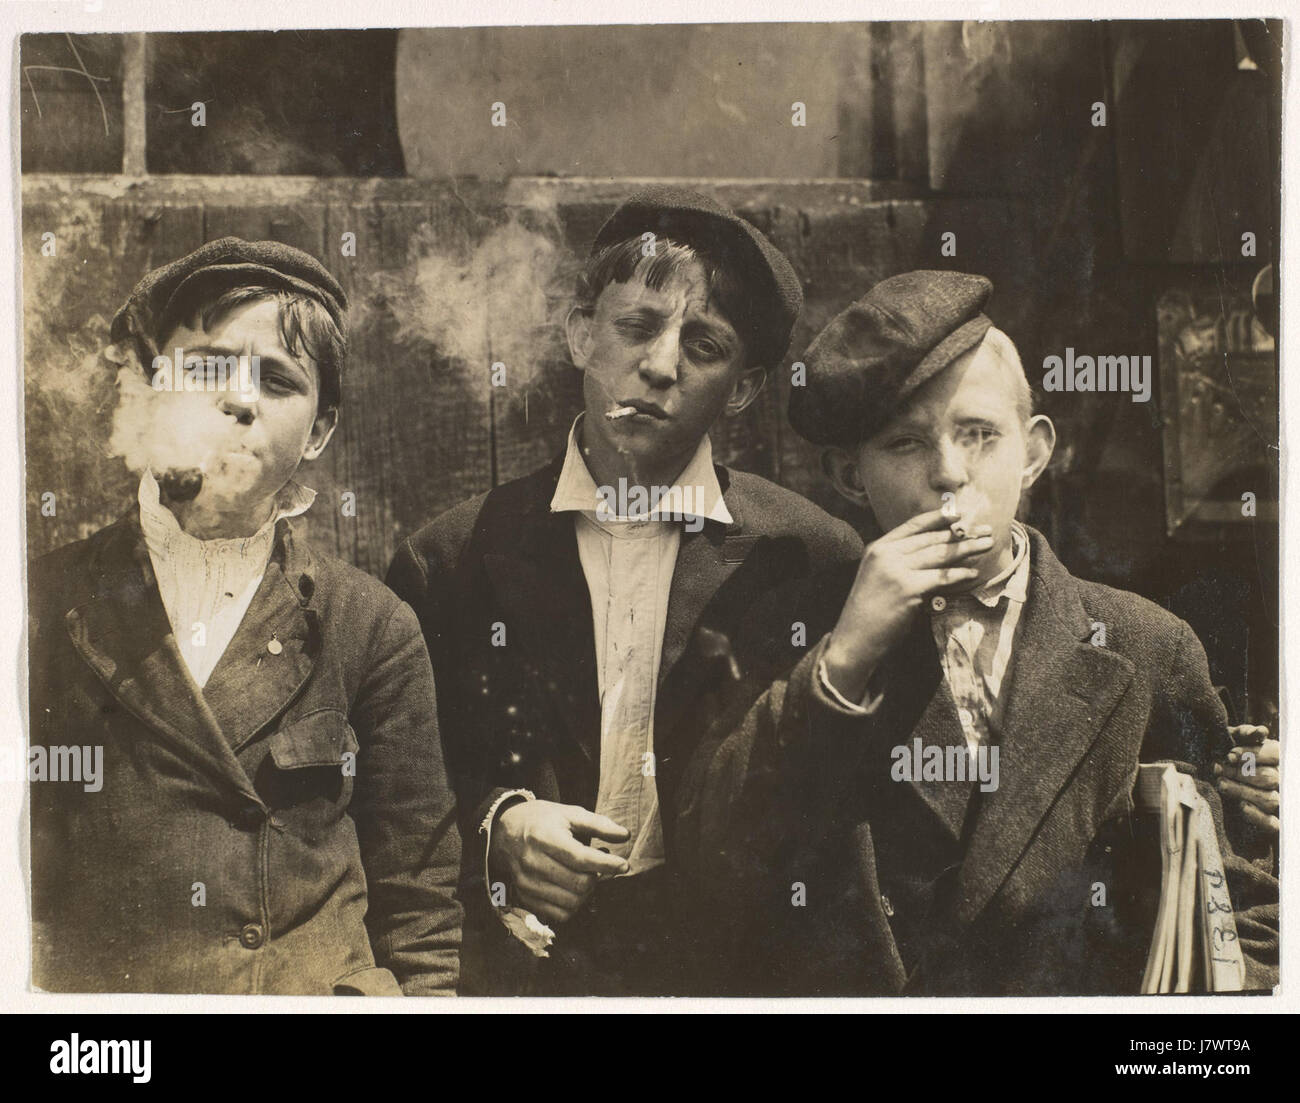 11 00 A.M. Monday, May 9th, 1910. Newsies at Skeeter's Branch, Jefferson near Franklin. They were all smoking. Location  St. Louis, Missouri. MET DP352686 Stock Photo